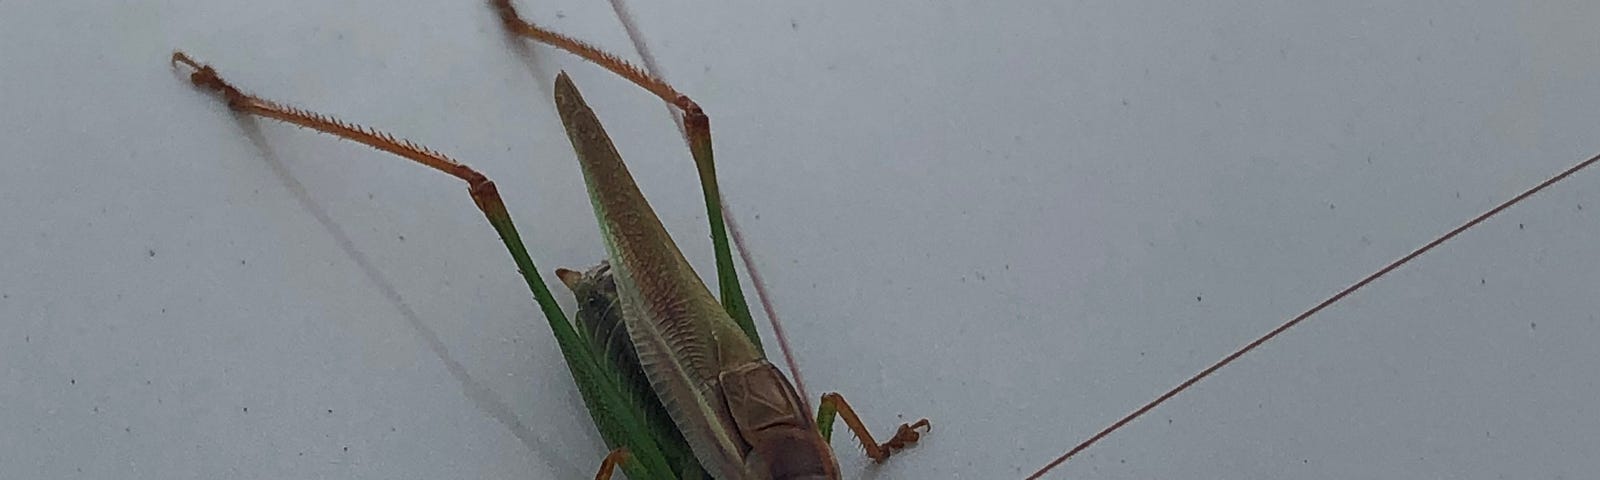 A grasshopper, facing downward, on the side of a car